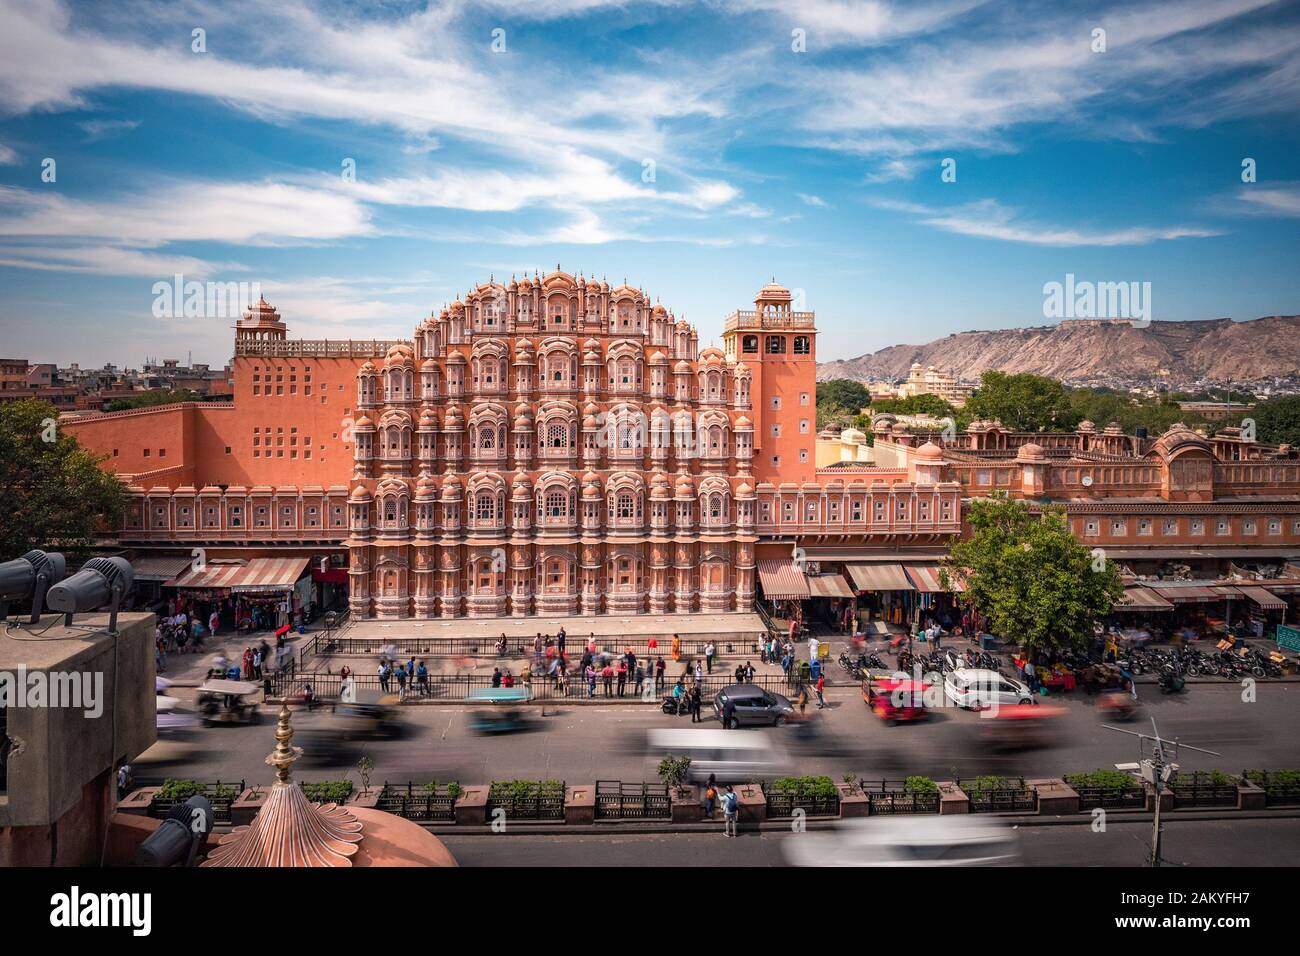 Architectural landmark Hawa Mahal, also known as the Palace of the Winds in Jaipur, Rajasthan, India. Stock Photo